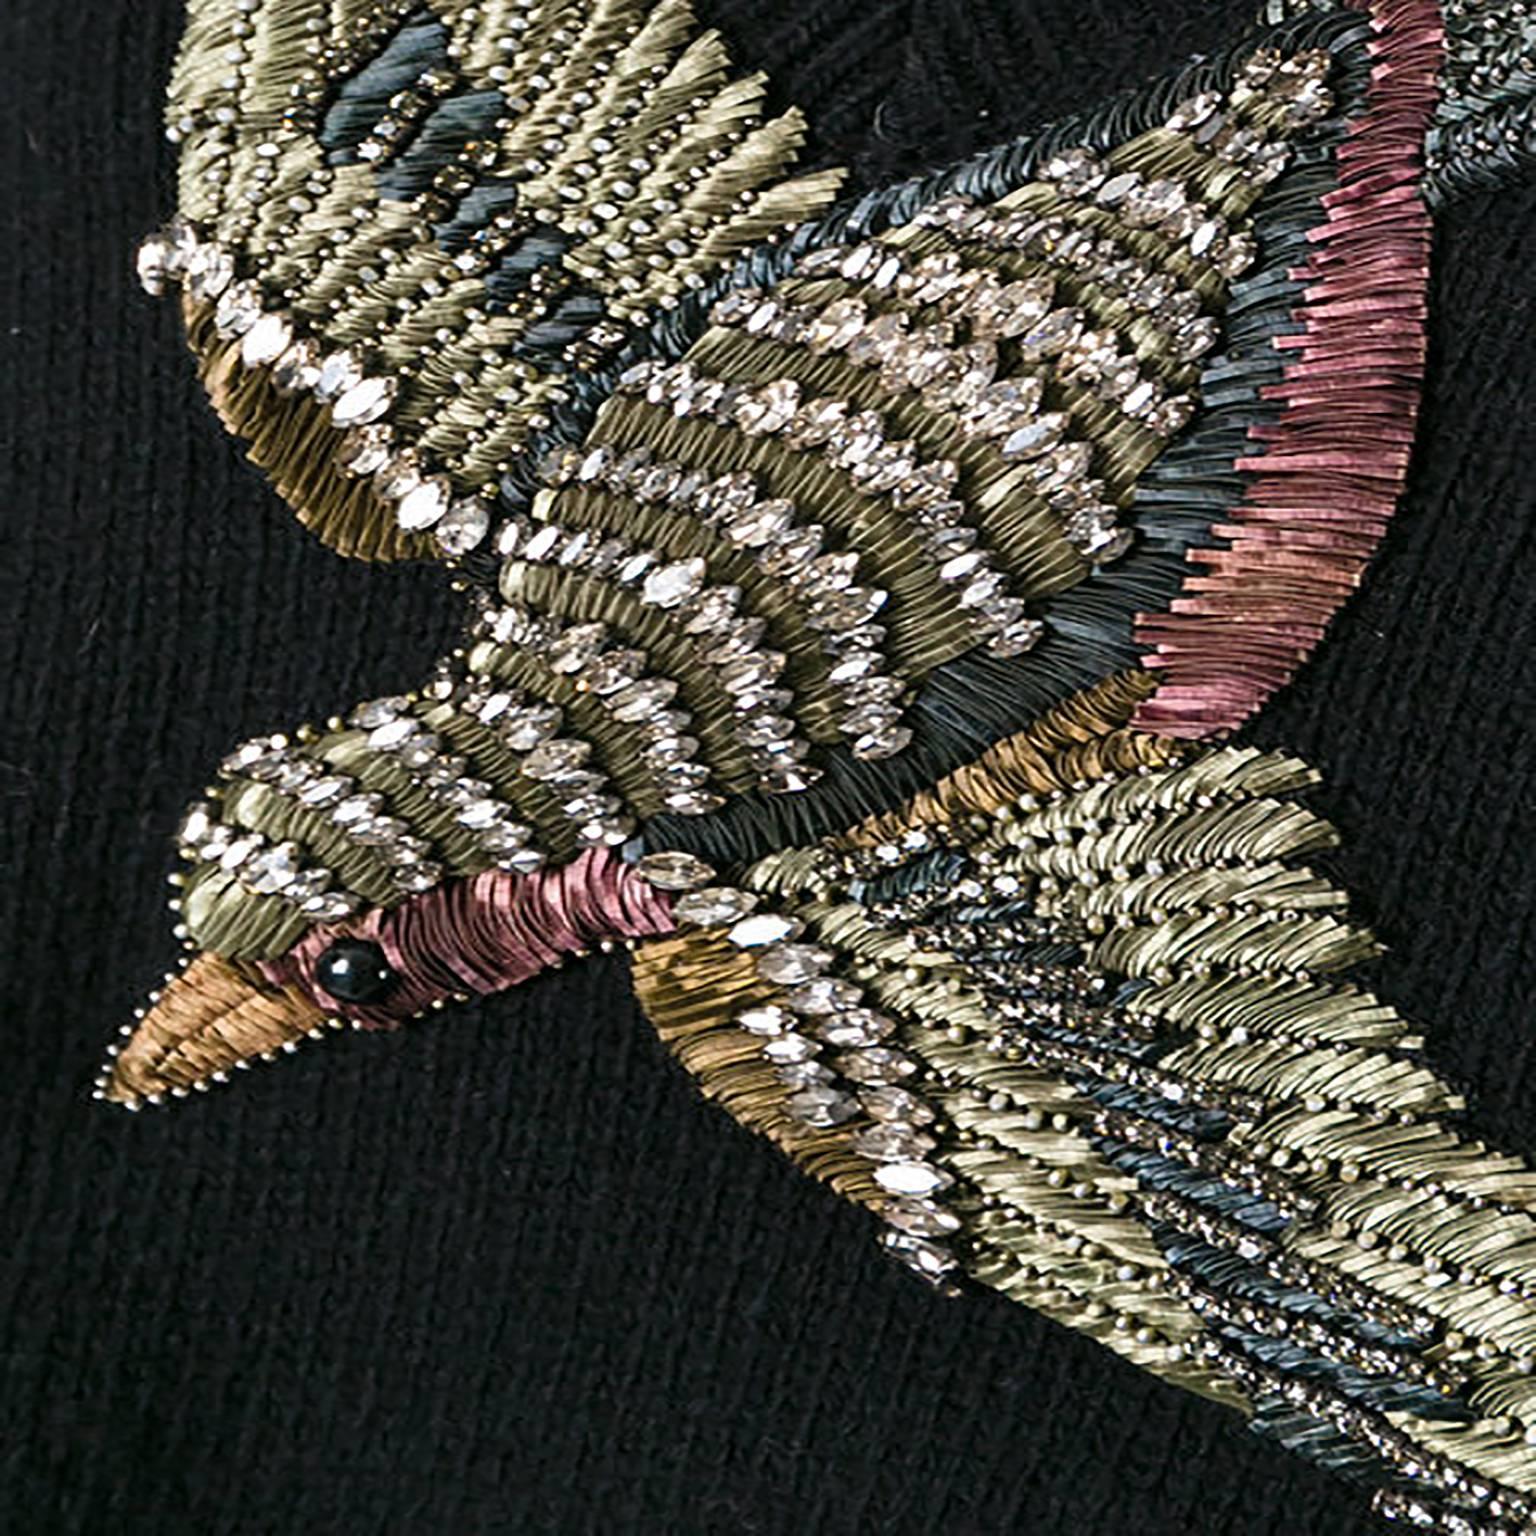 Alessandro Michele’s new creative direction at Gucci is full of ornate details and romantic flourishes. This Gucci jumper showcases this beautifully, with an appliqué bird across its black woollen front. The jumper has a slightly relaxed fit and a